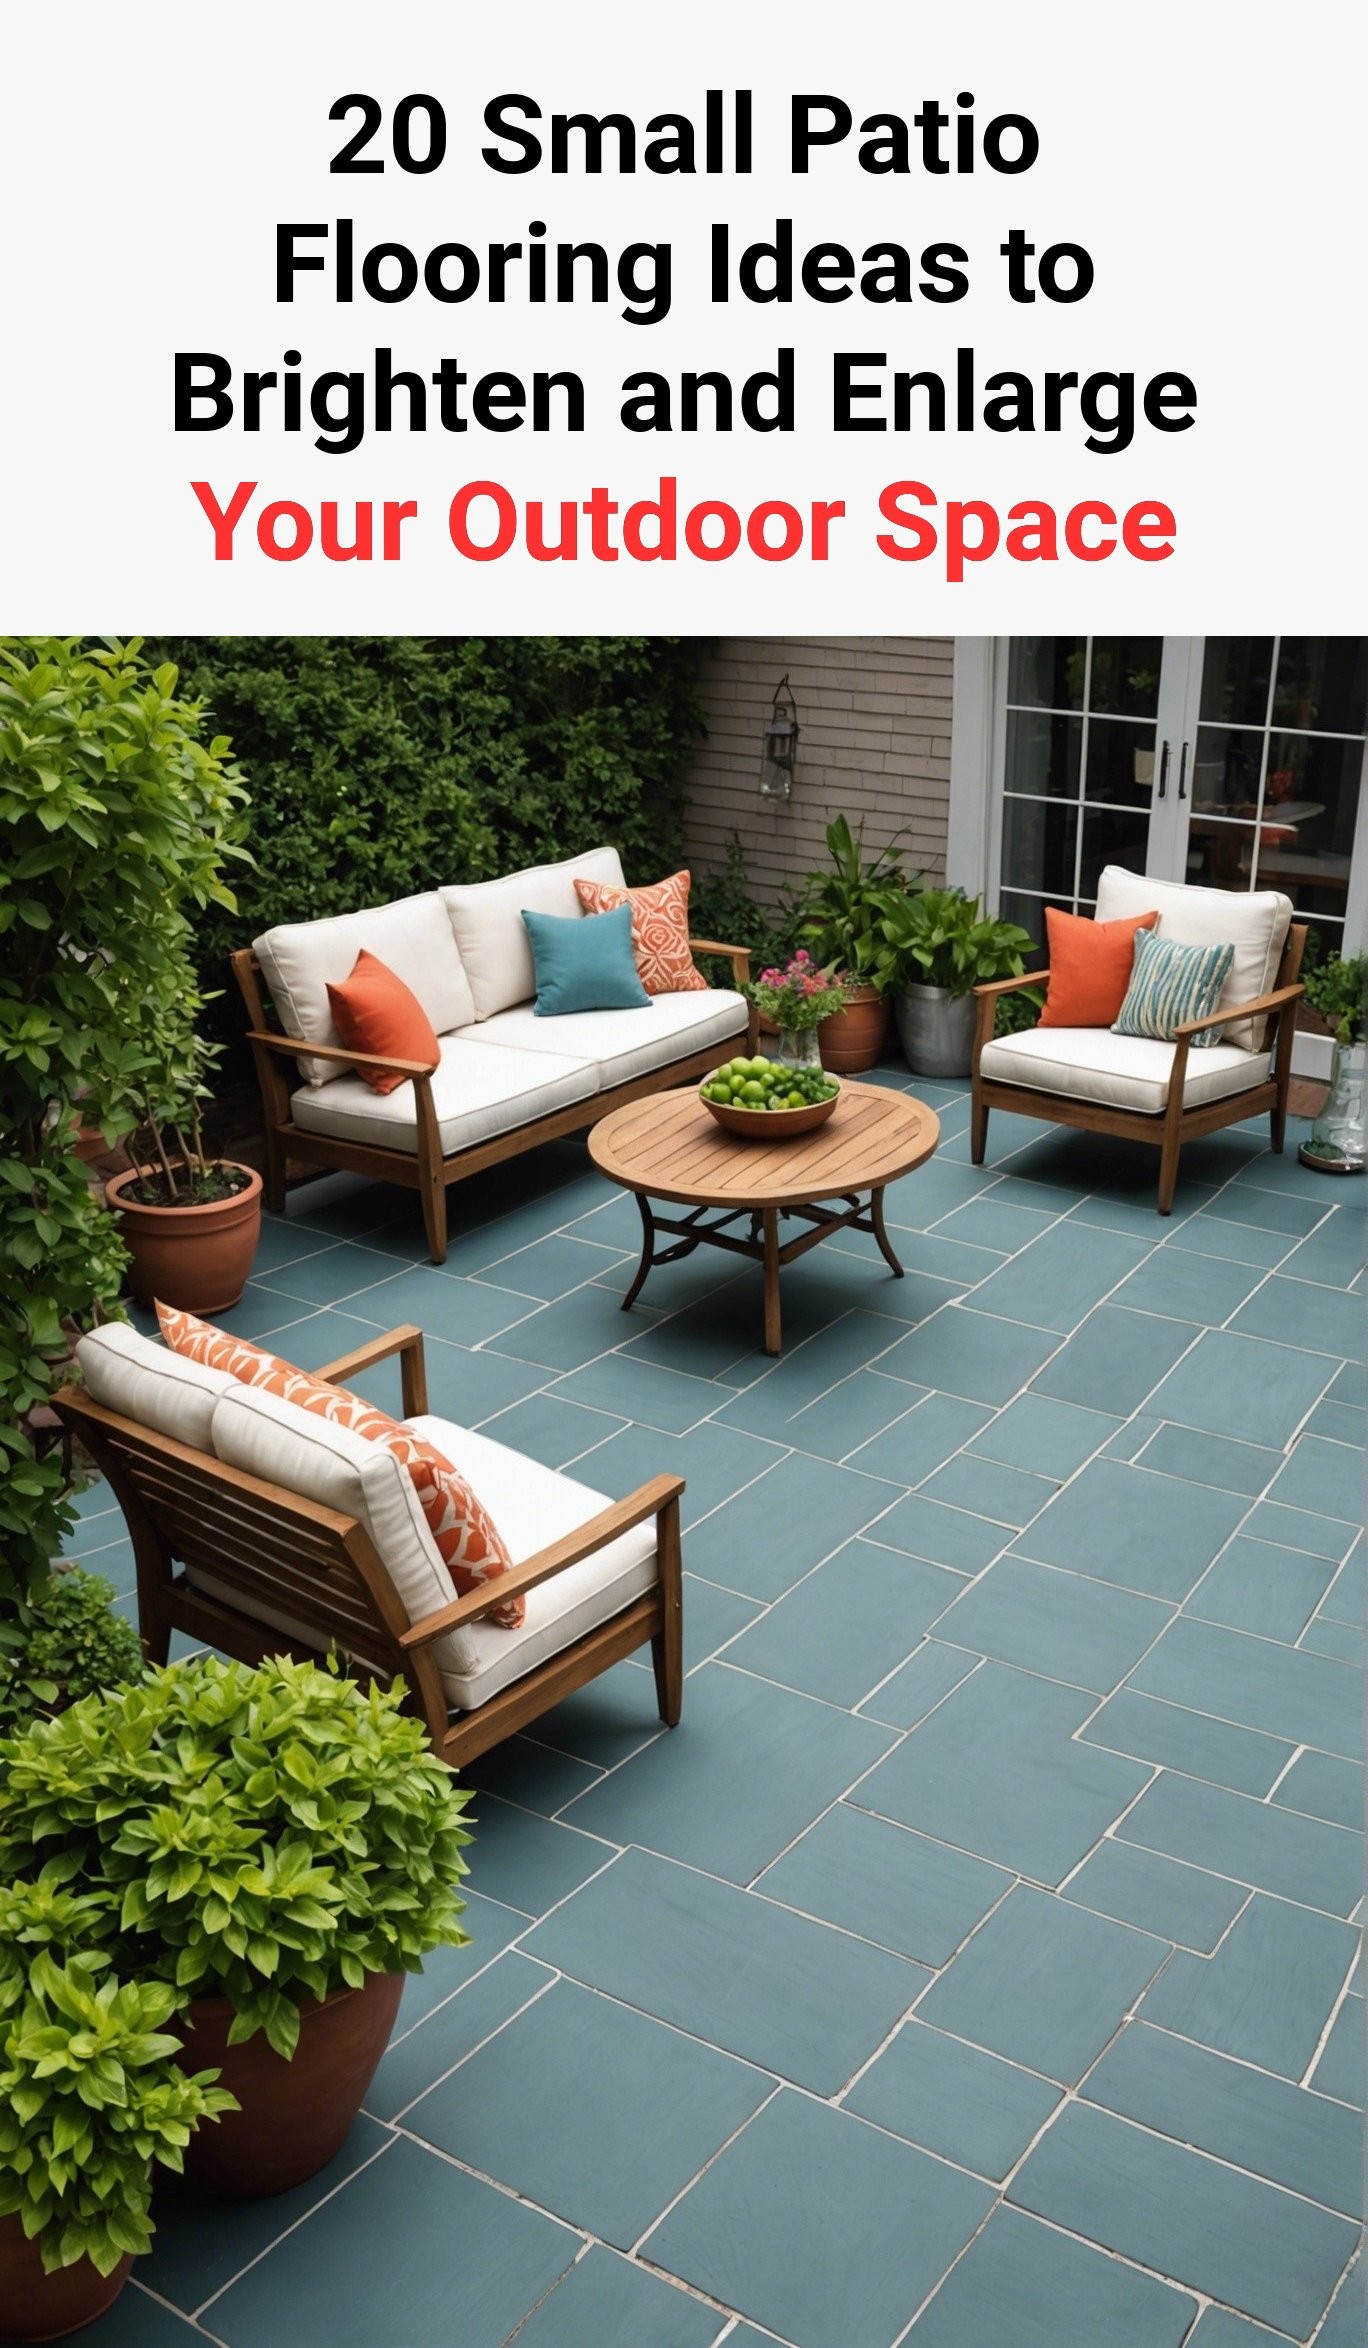 20 Small Patio Flooring Ideas to Brighten and Enlarge Your Outdoor Space